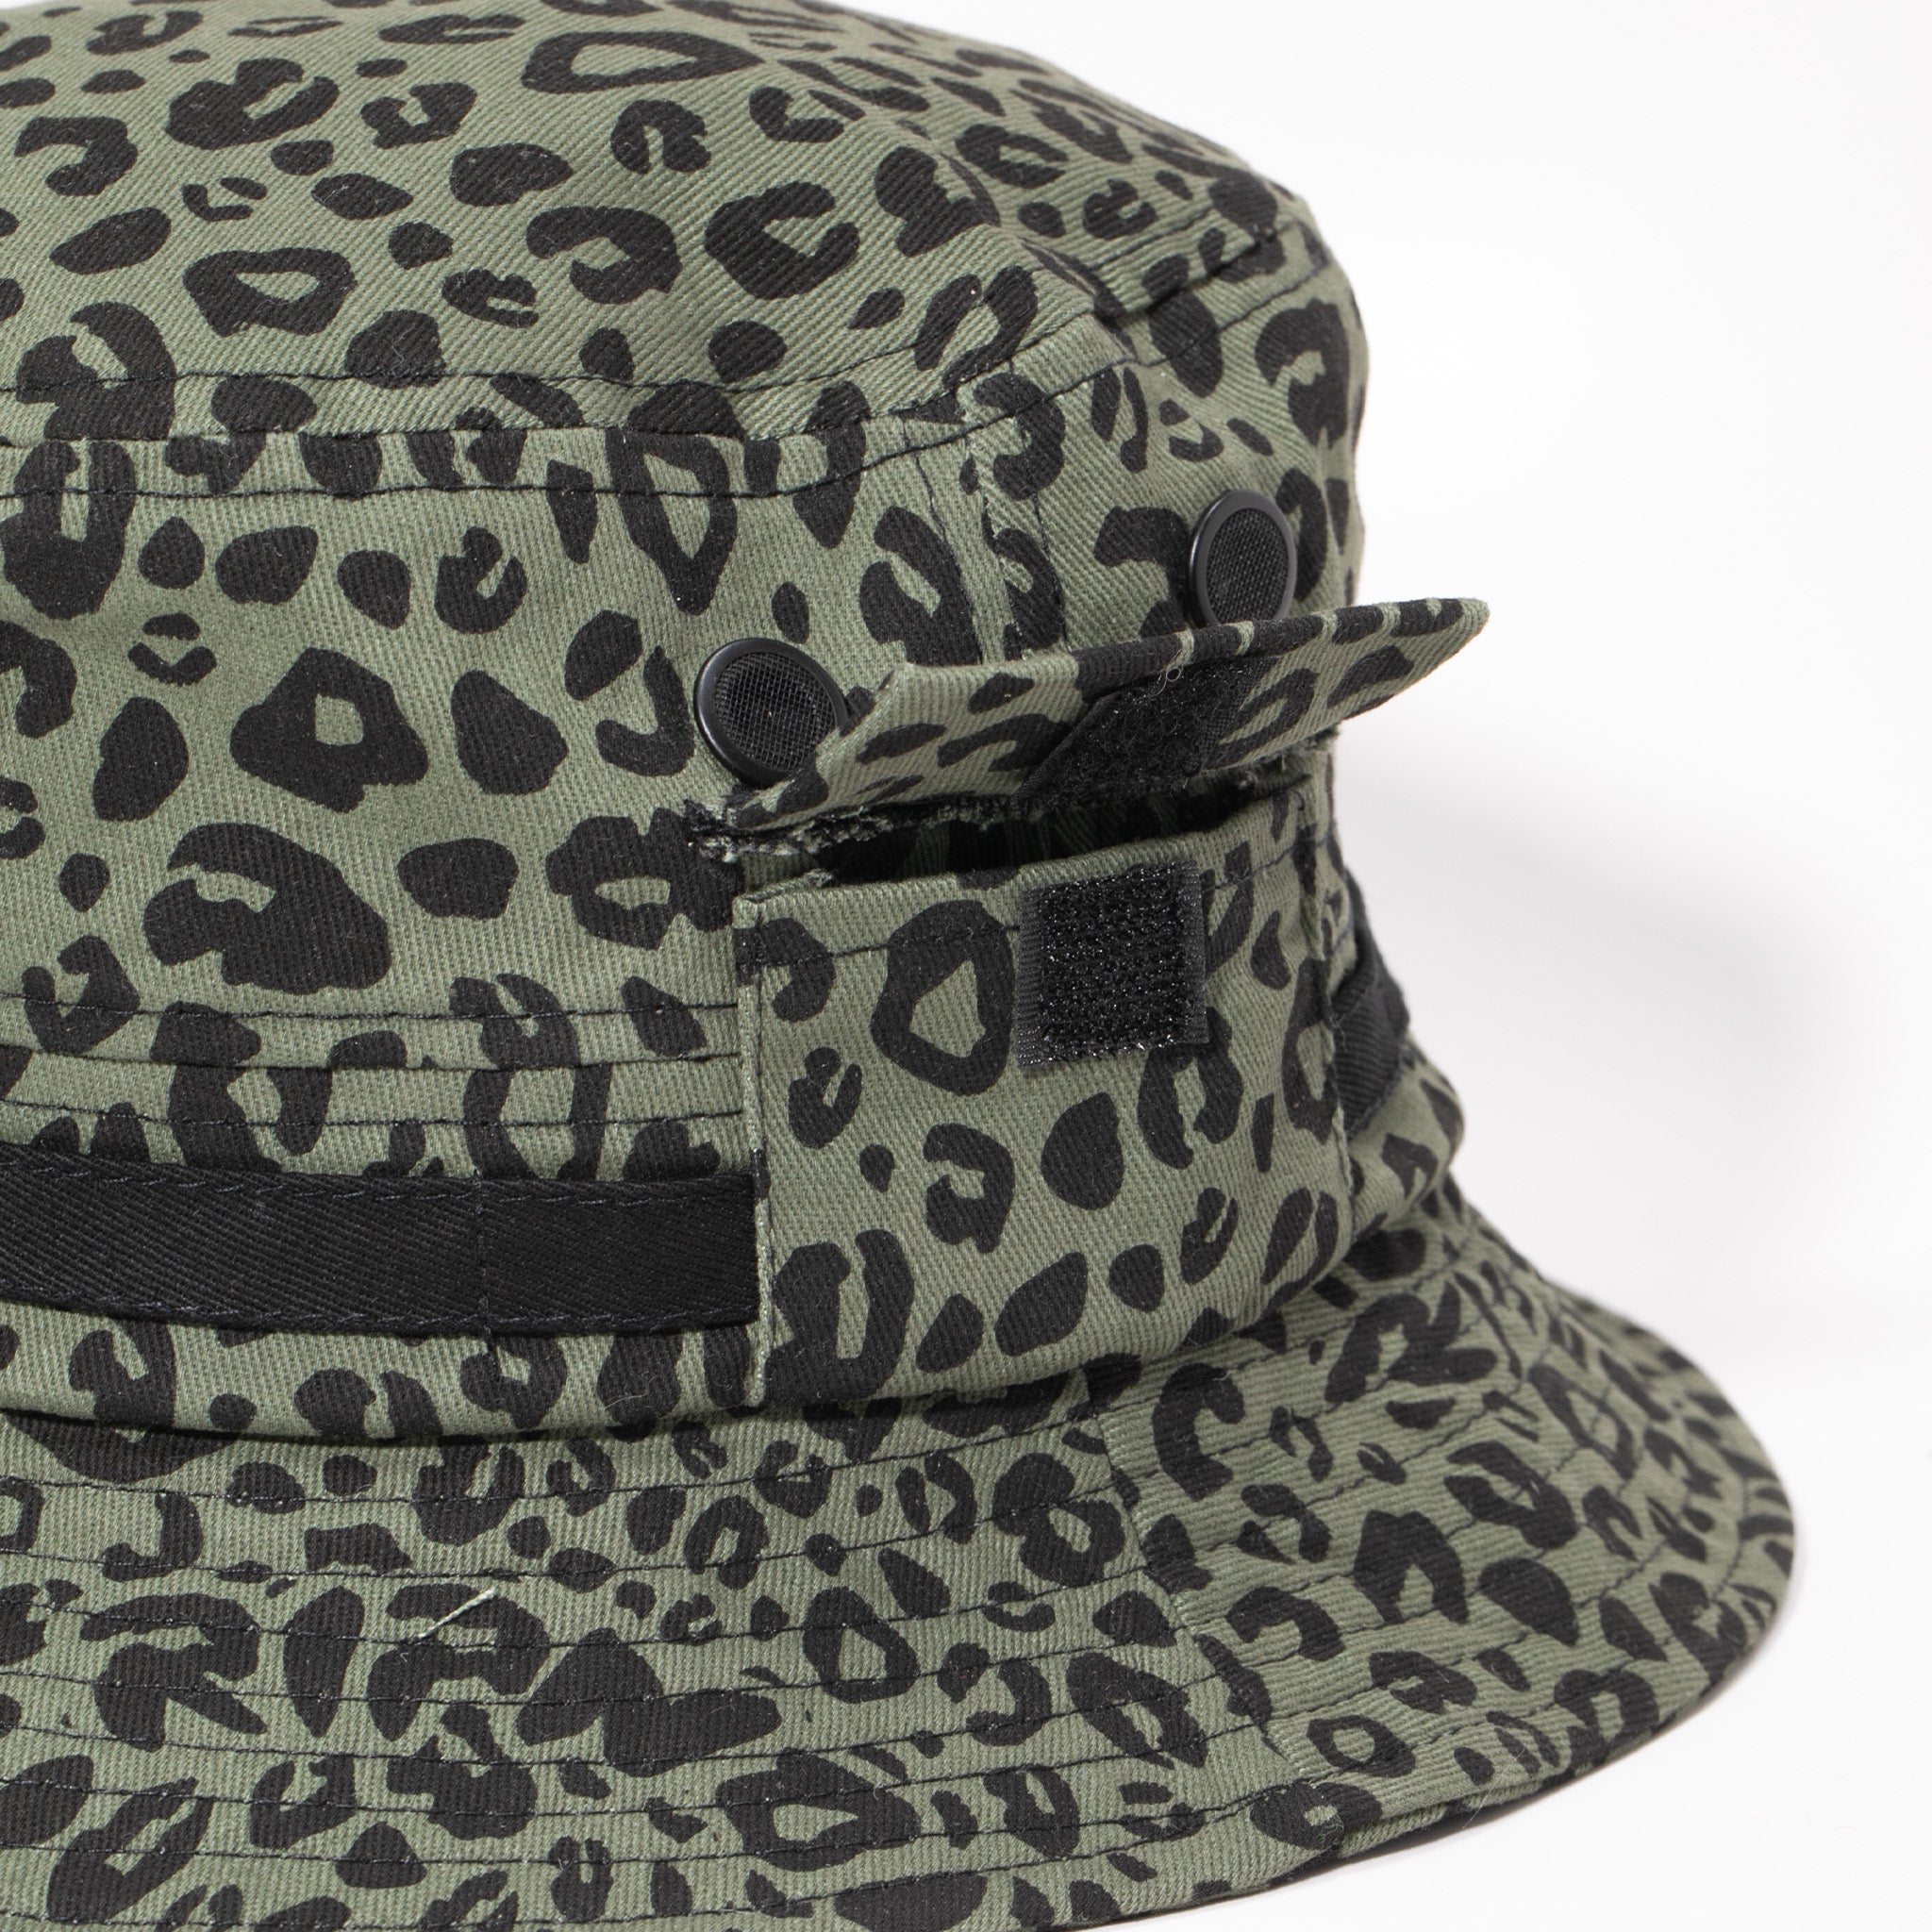 RipNDip Spotted Cotton Twill Bucket Hat (Olive)